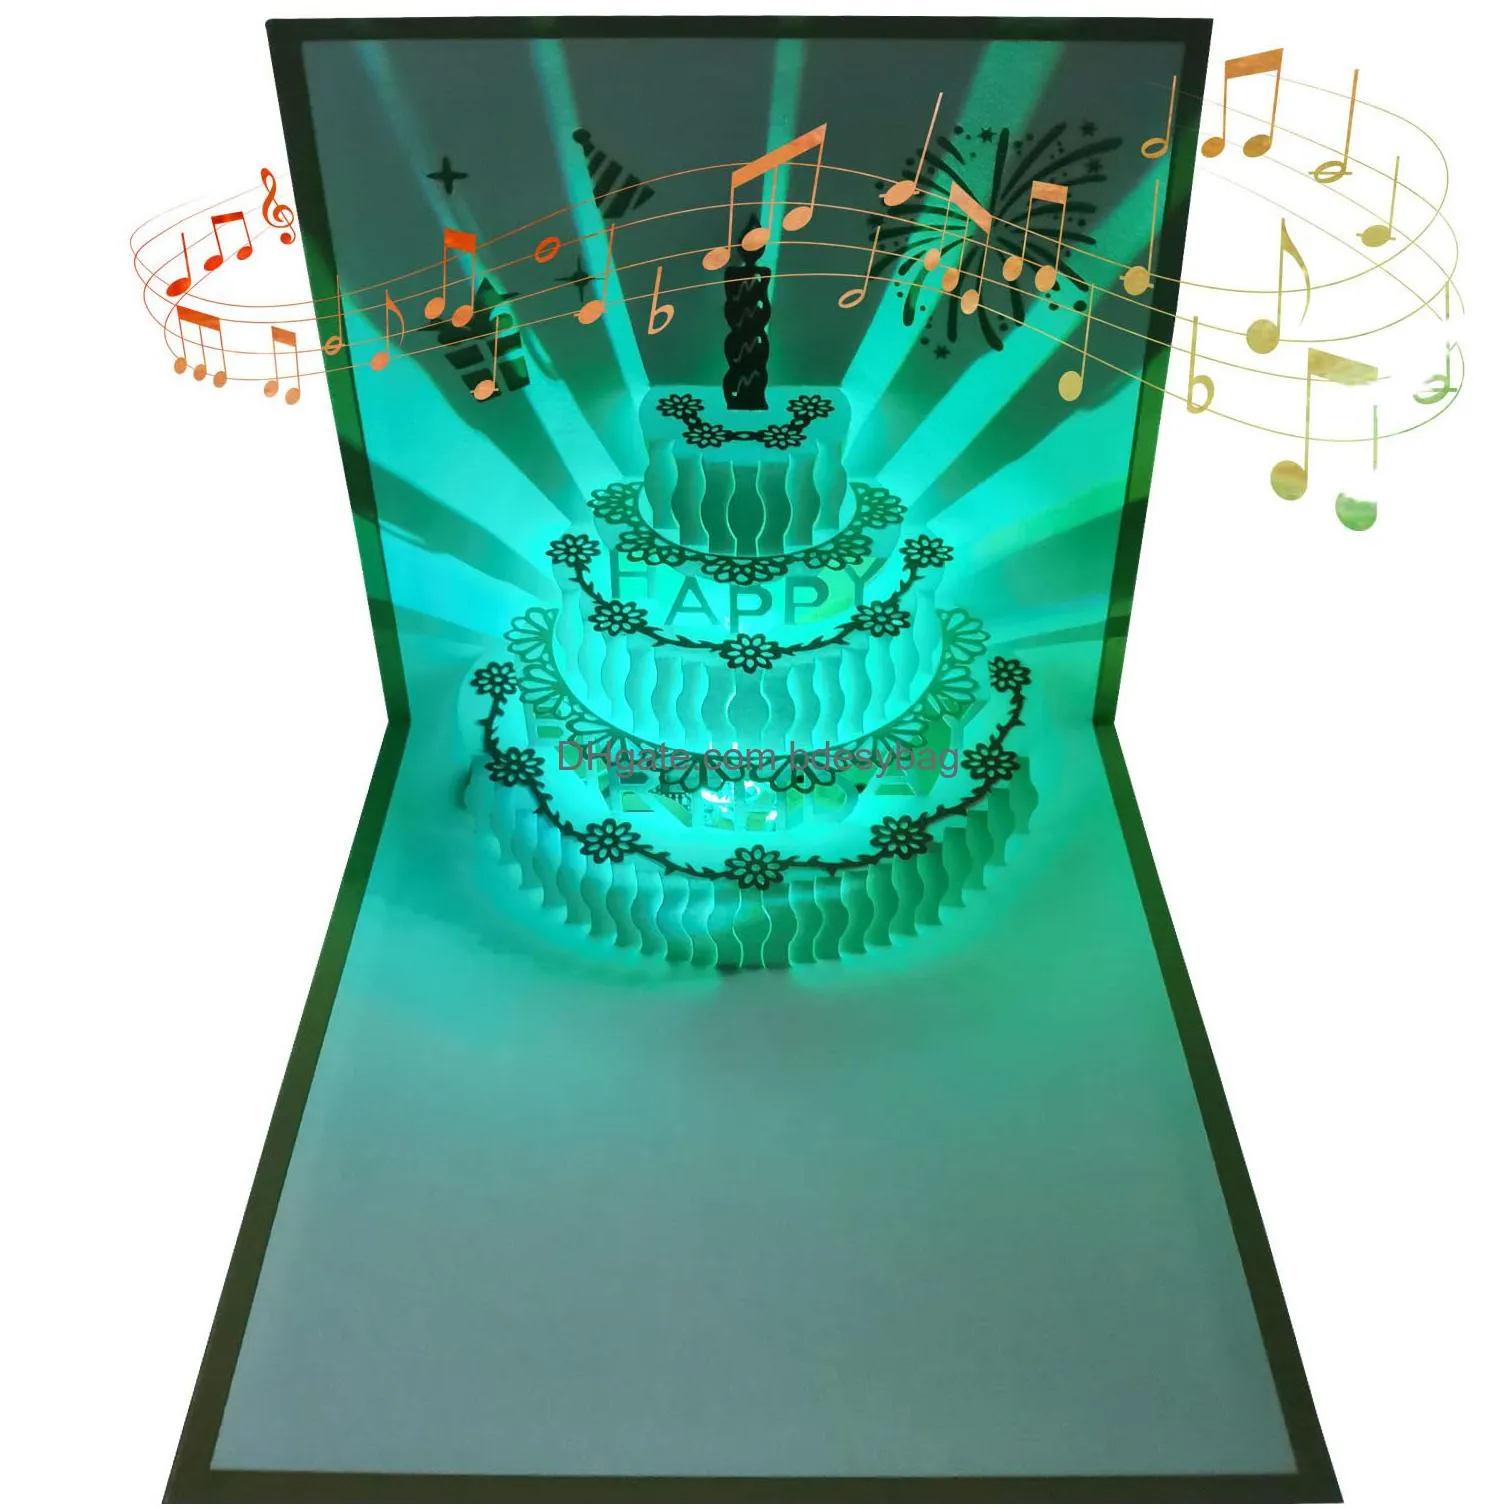 musical birthday card with light blowable candle 3d colourful light popup cards with happy birthday music blow out led light candle cheers sound bday gift greeting cards for women kids men